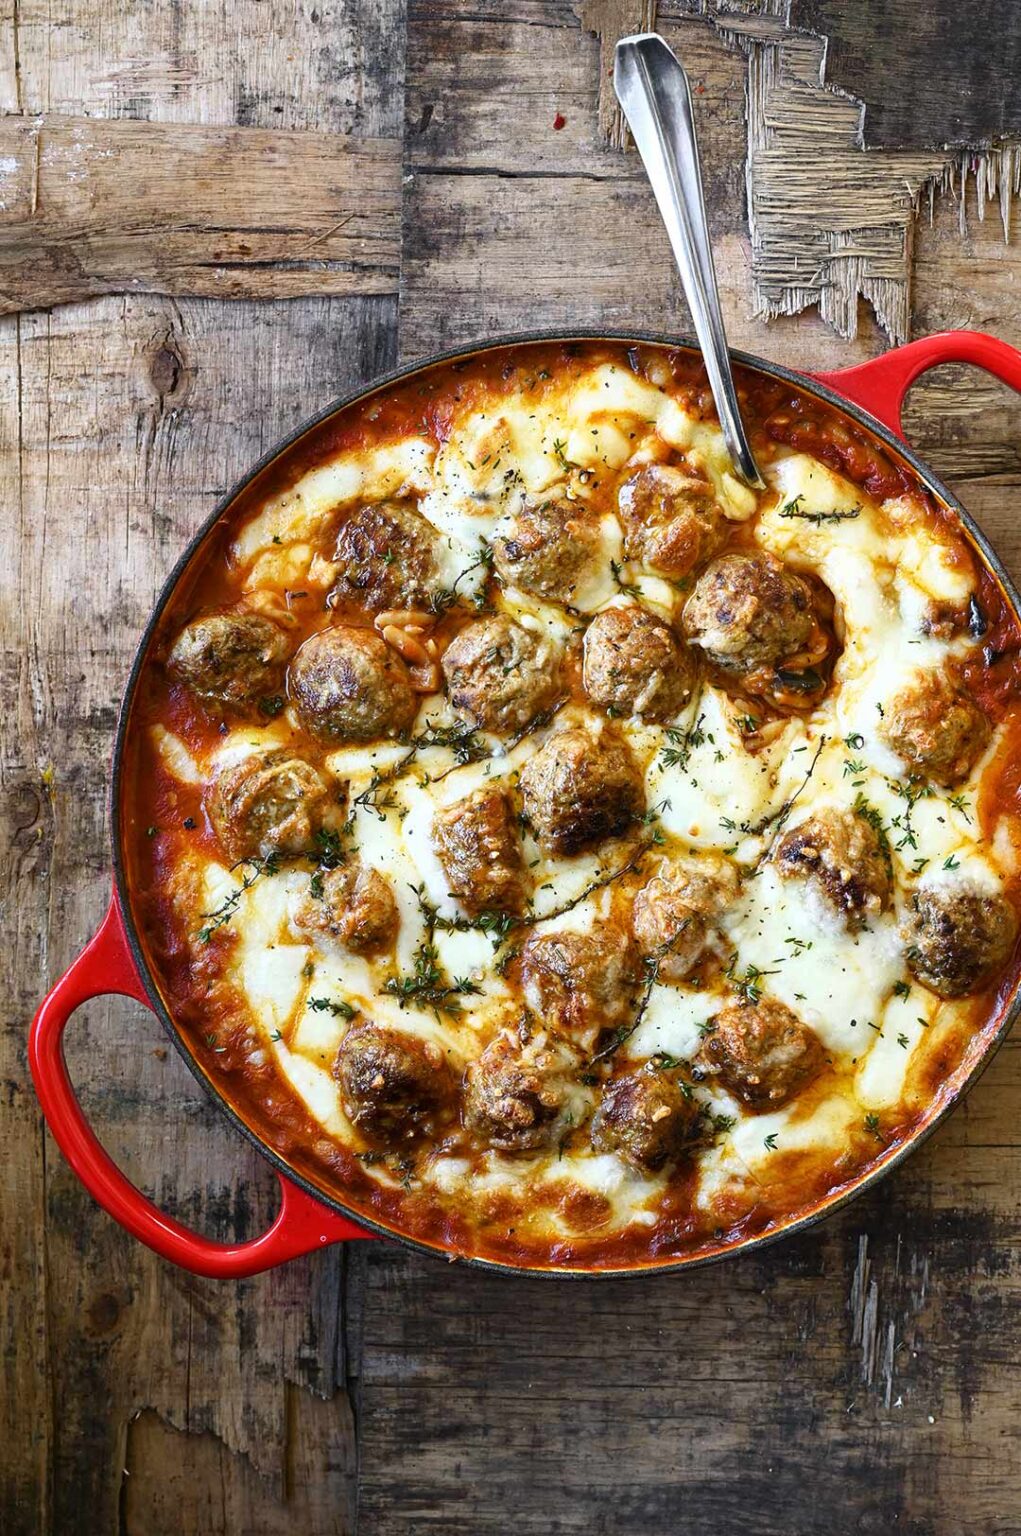 Baked Meatballs with Orzo in Roasted Pepper Sauce - Serving Dumplings